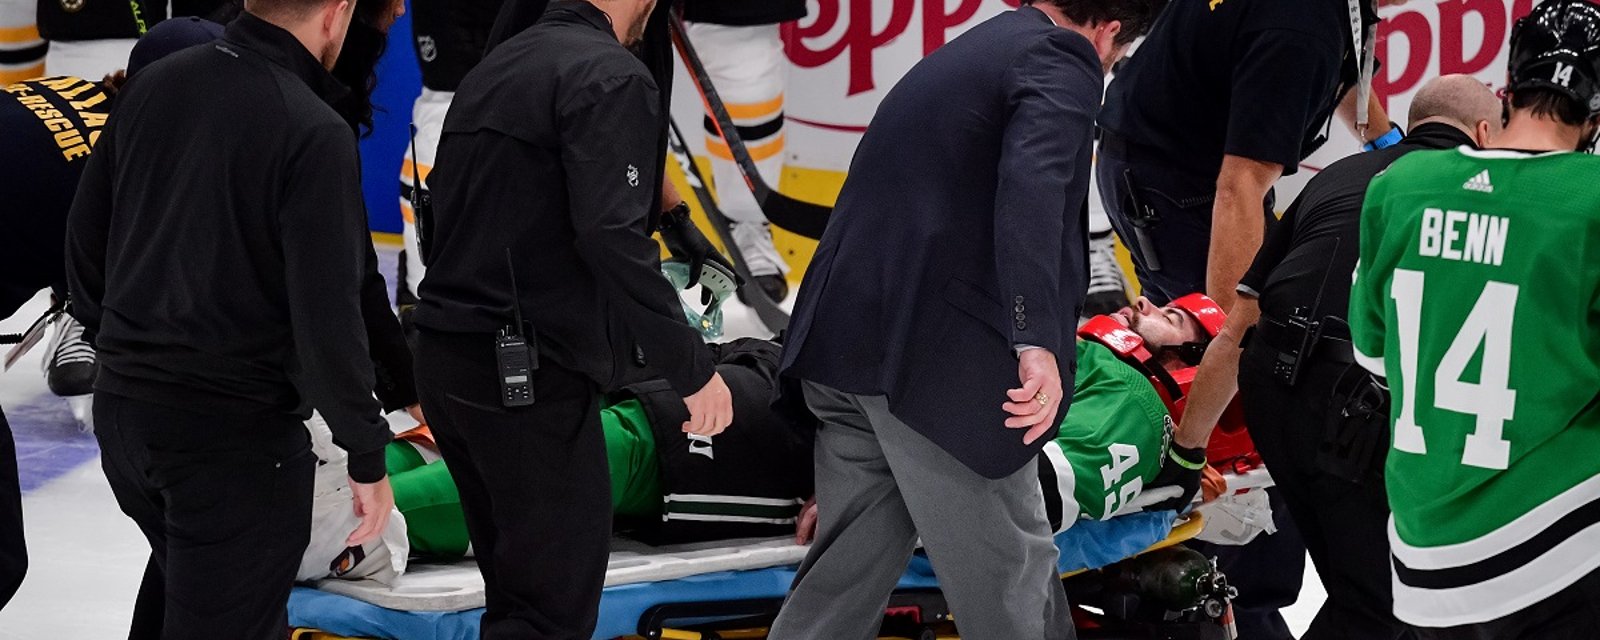 Roman Polak reveals he nearly “sh*t himself” because of his injury.